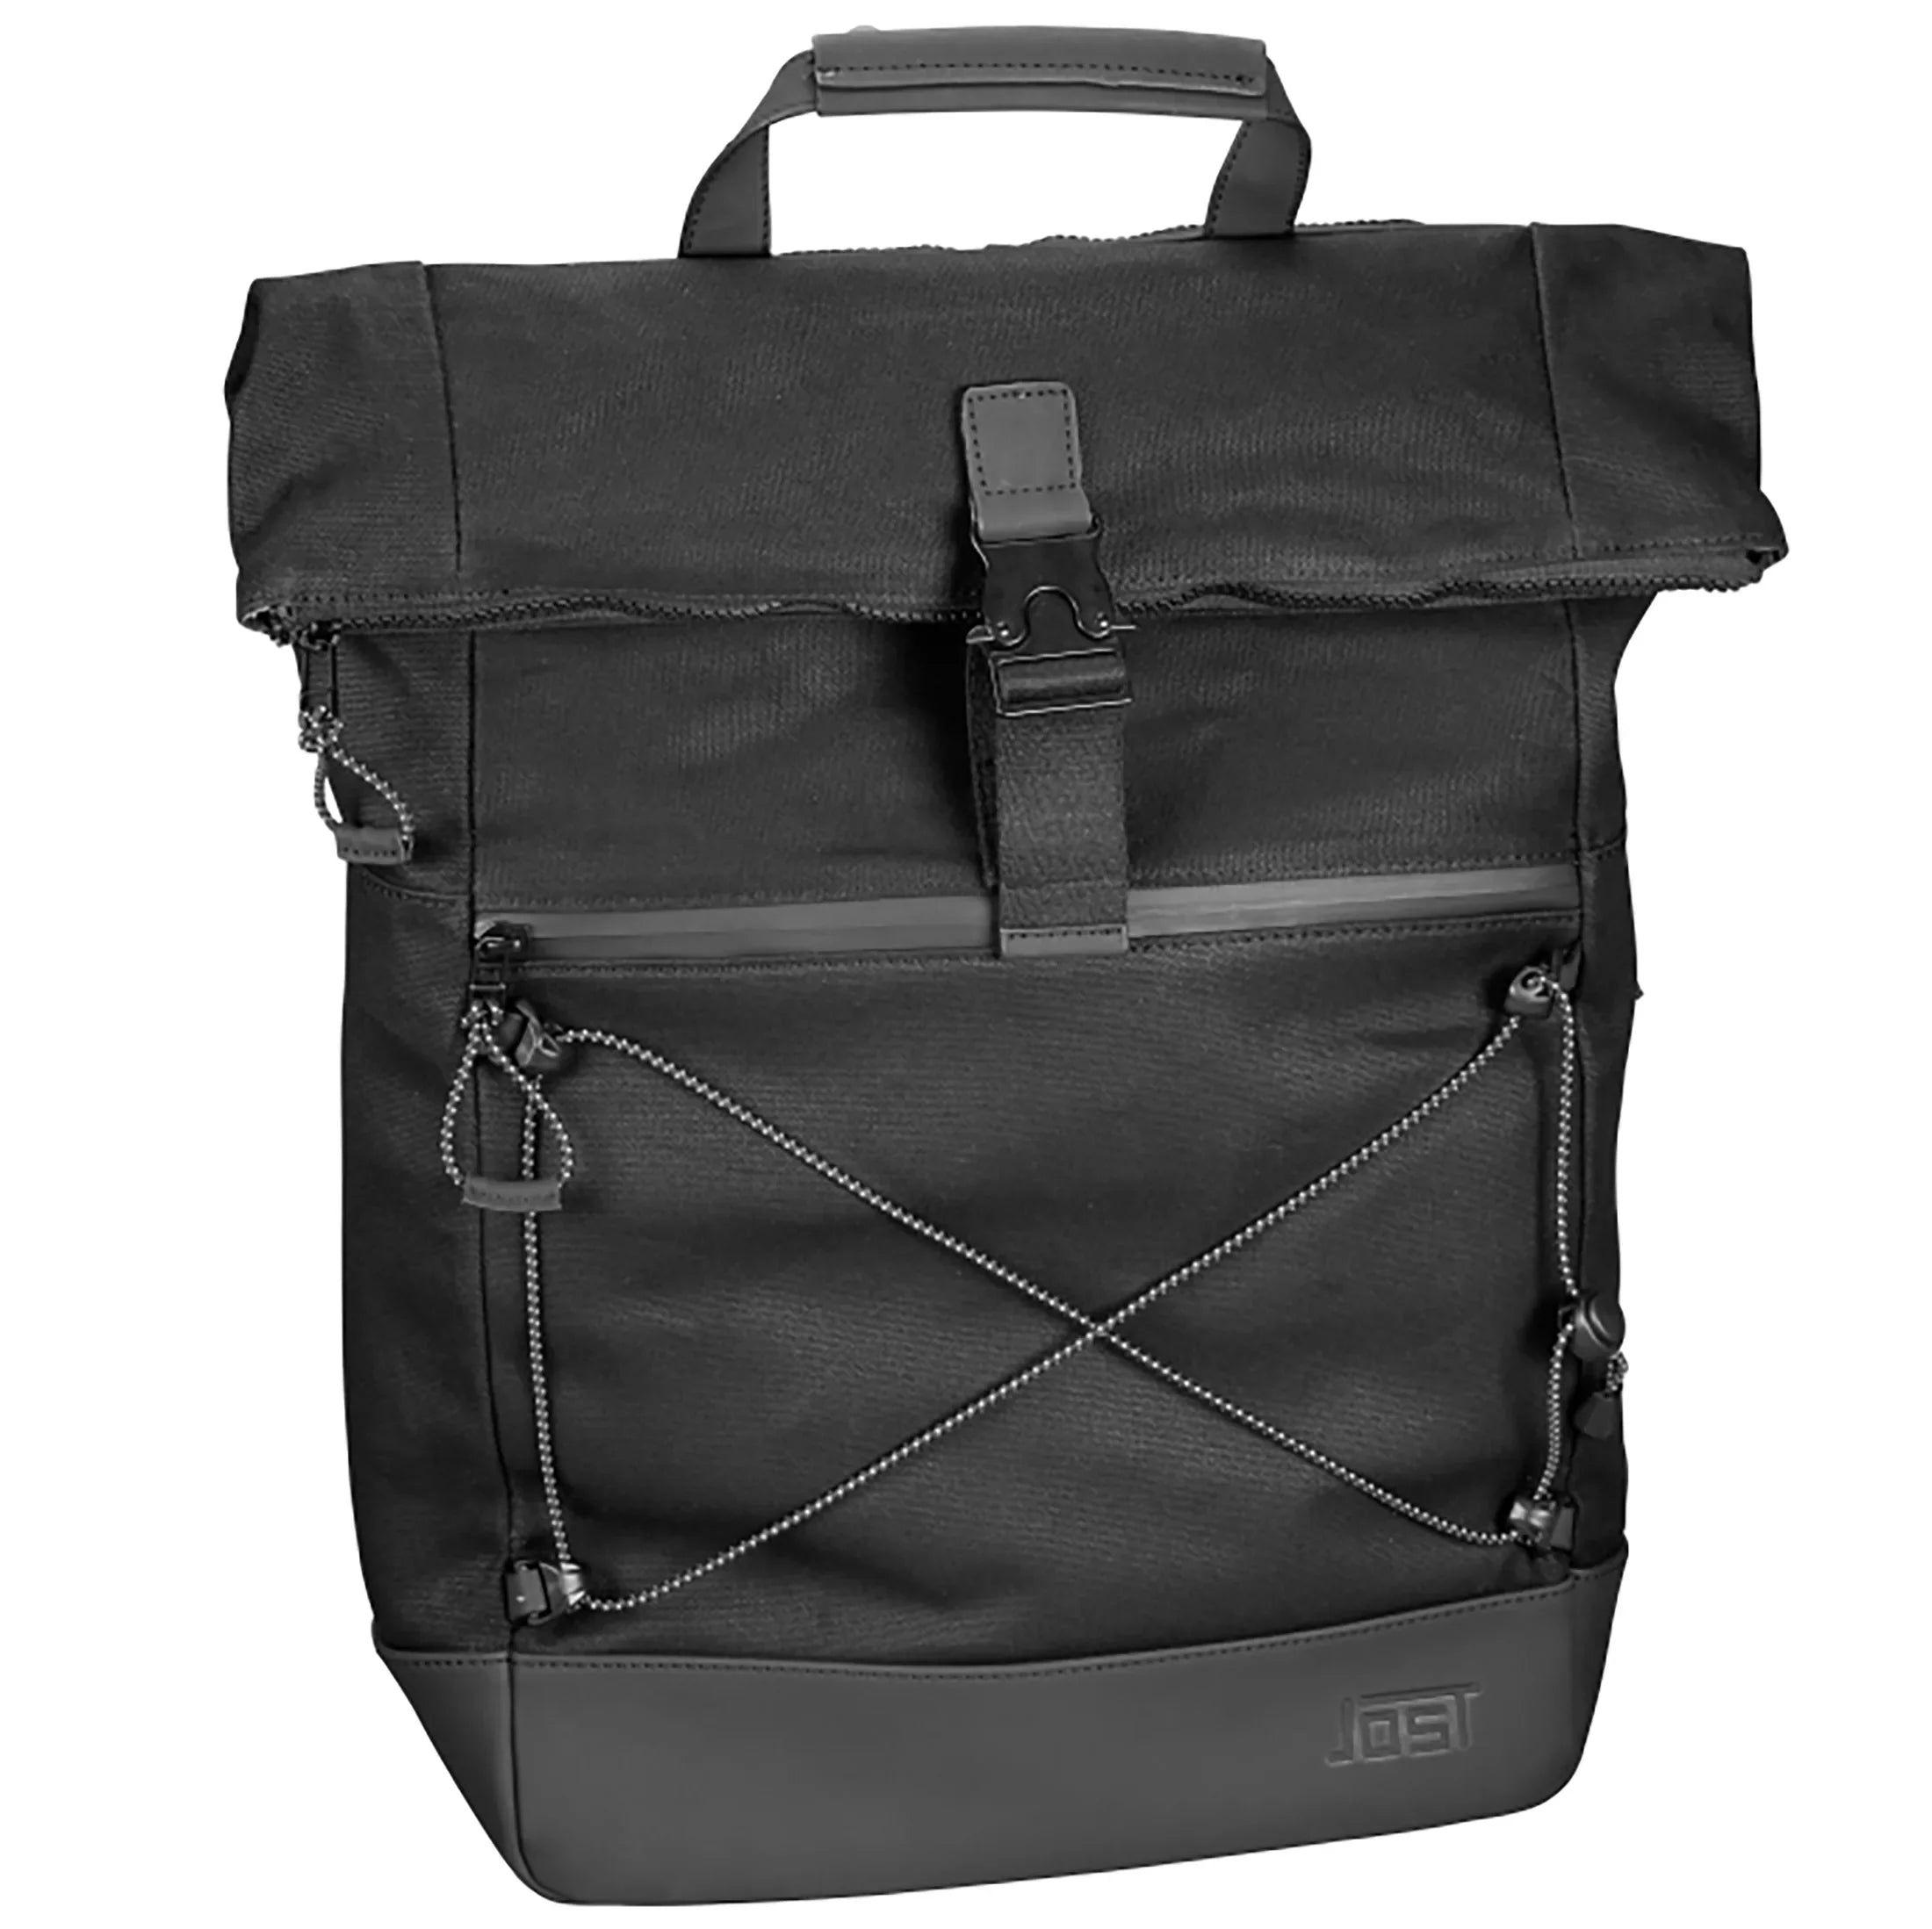 Jost Ystad messenger backpack with laptop compartment 46 cm - black